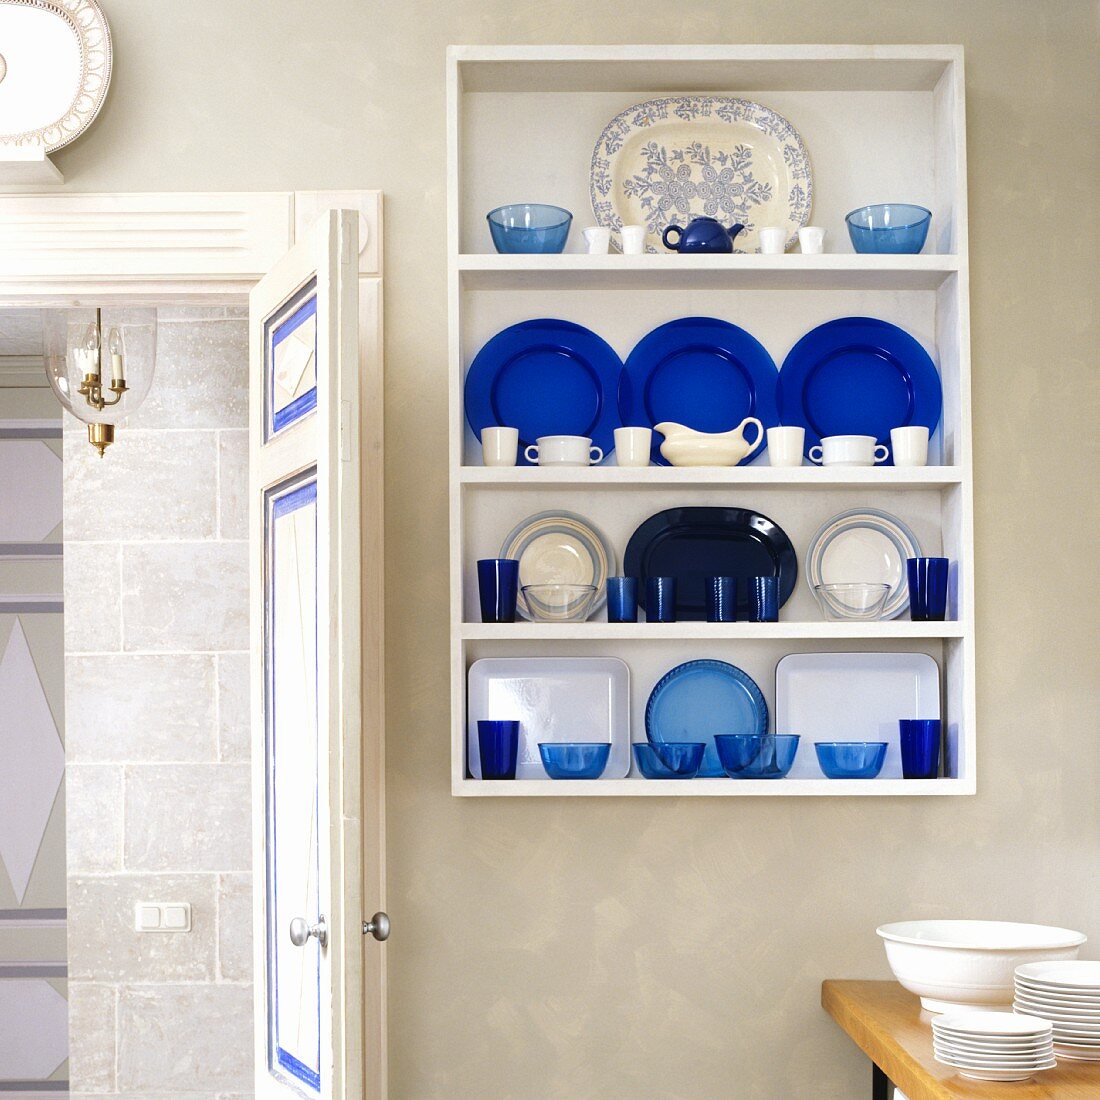 Blue and white crockery in wall-mounted shelves next to open door